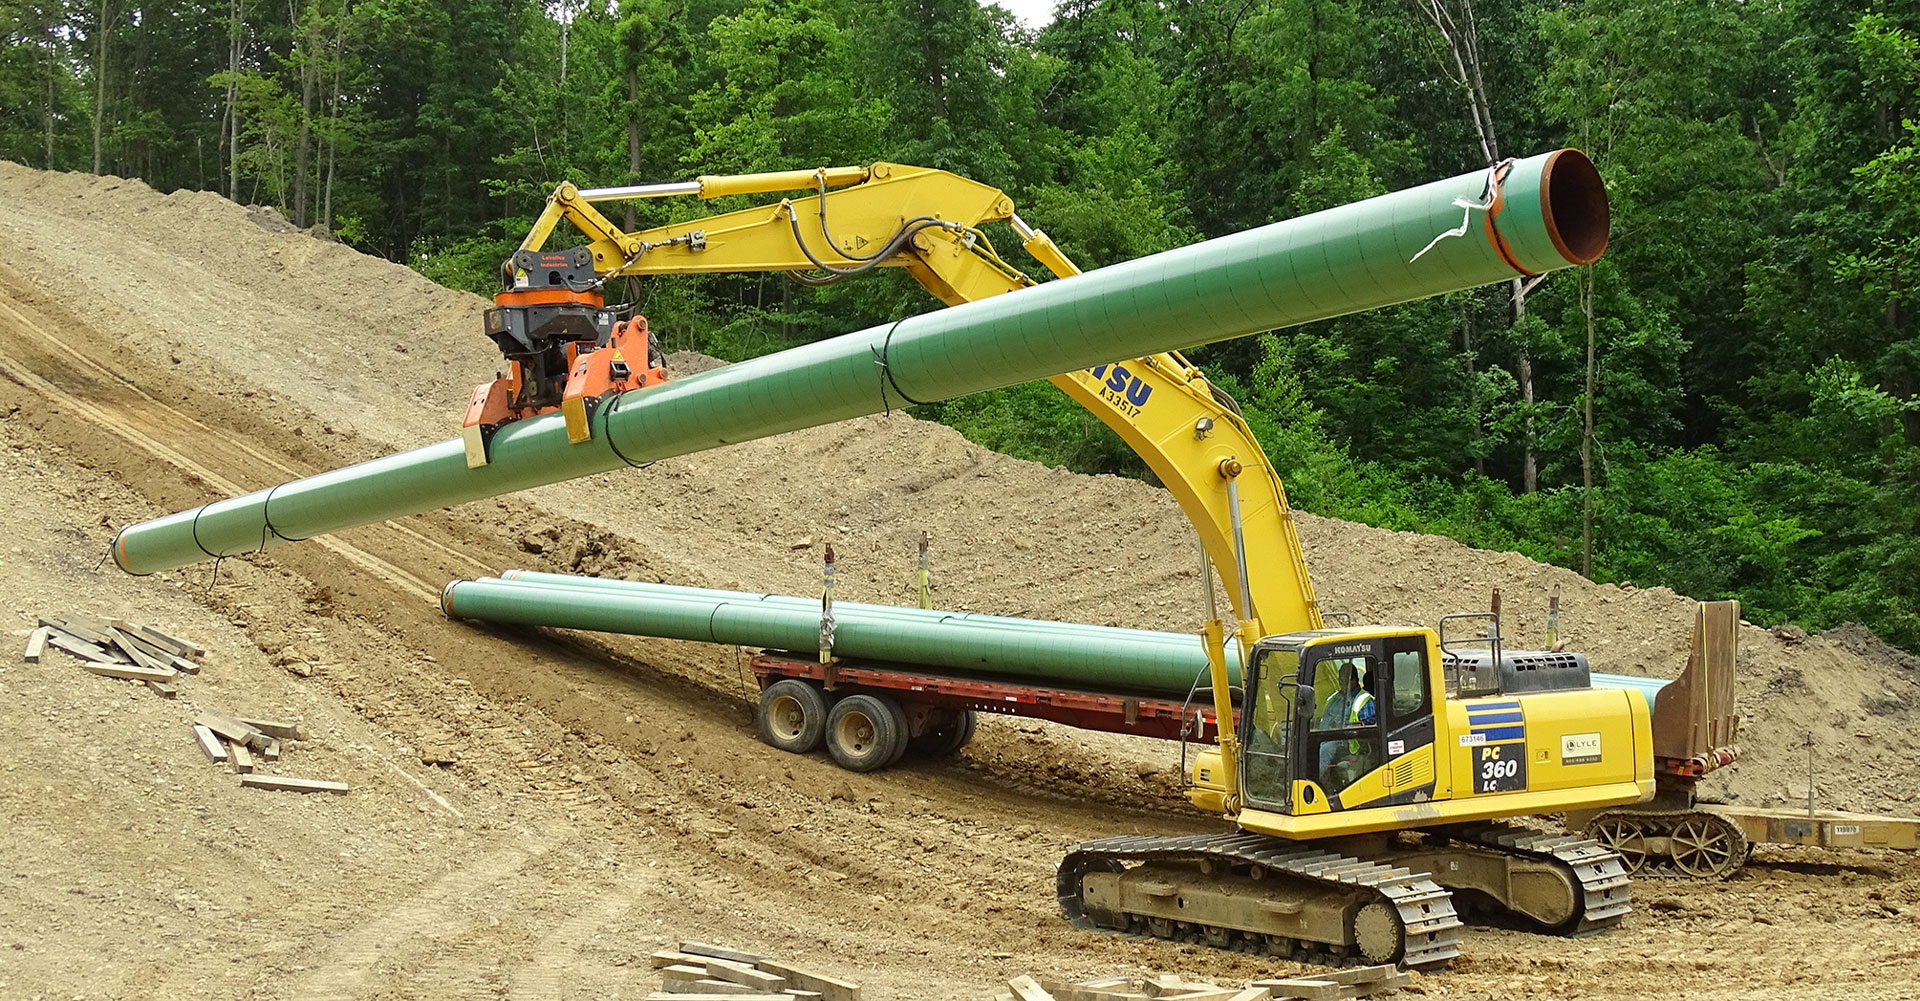 The DECKHAND® system in action! In this image a DECKHAND® is attached to an excavator. Outfitted with Pipe Arms, the DECKHAND® makes quick work of handling pipe around a job site.